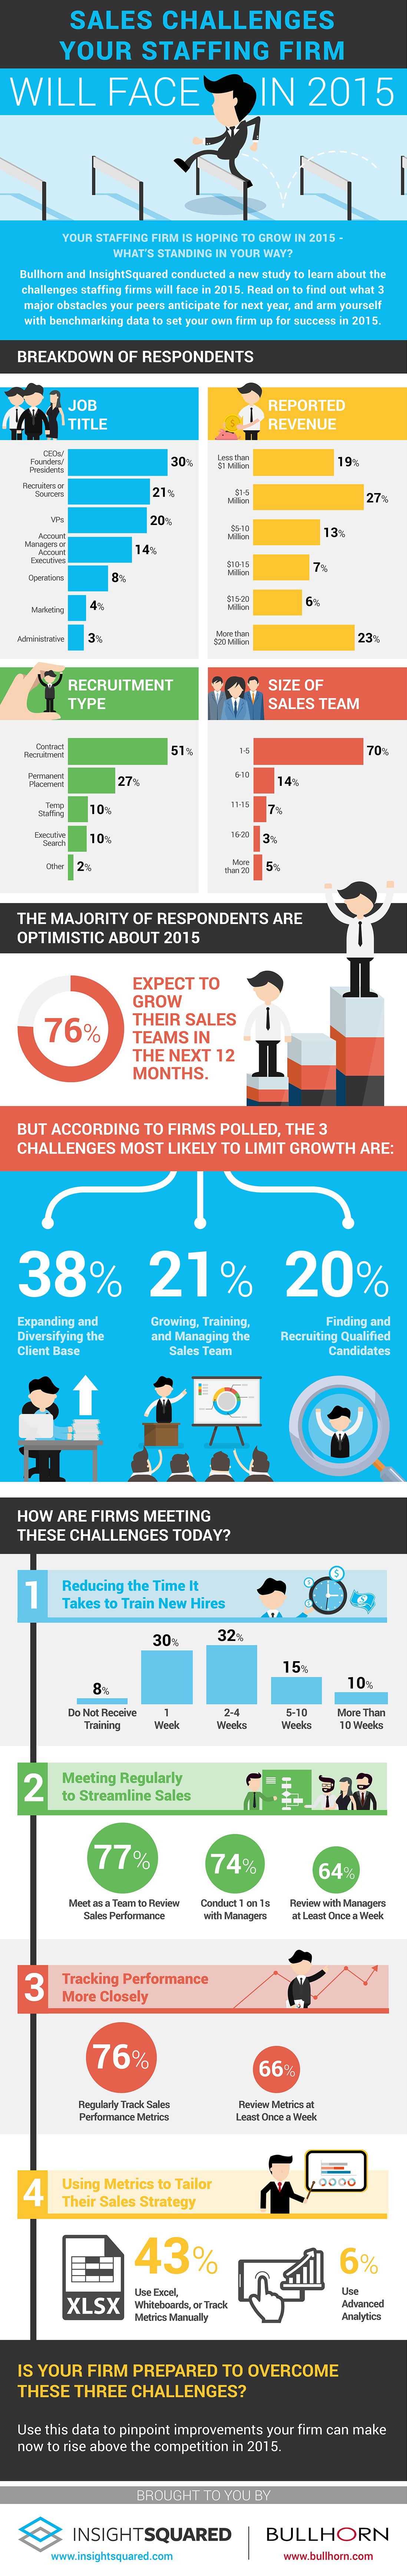 Sales Challenges Your Staffing Firm Will Face in 2015